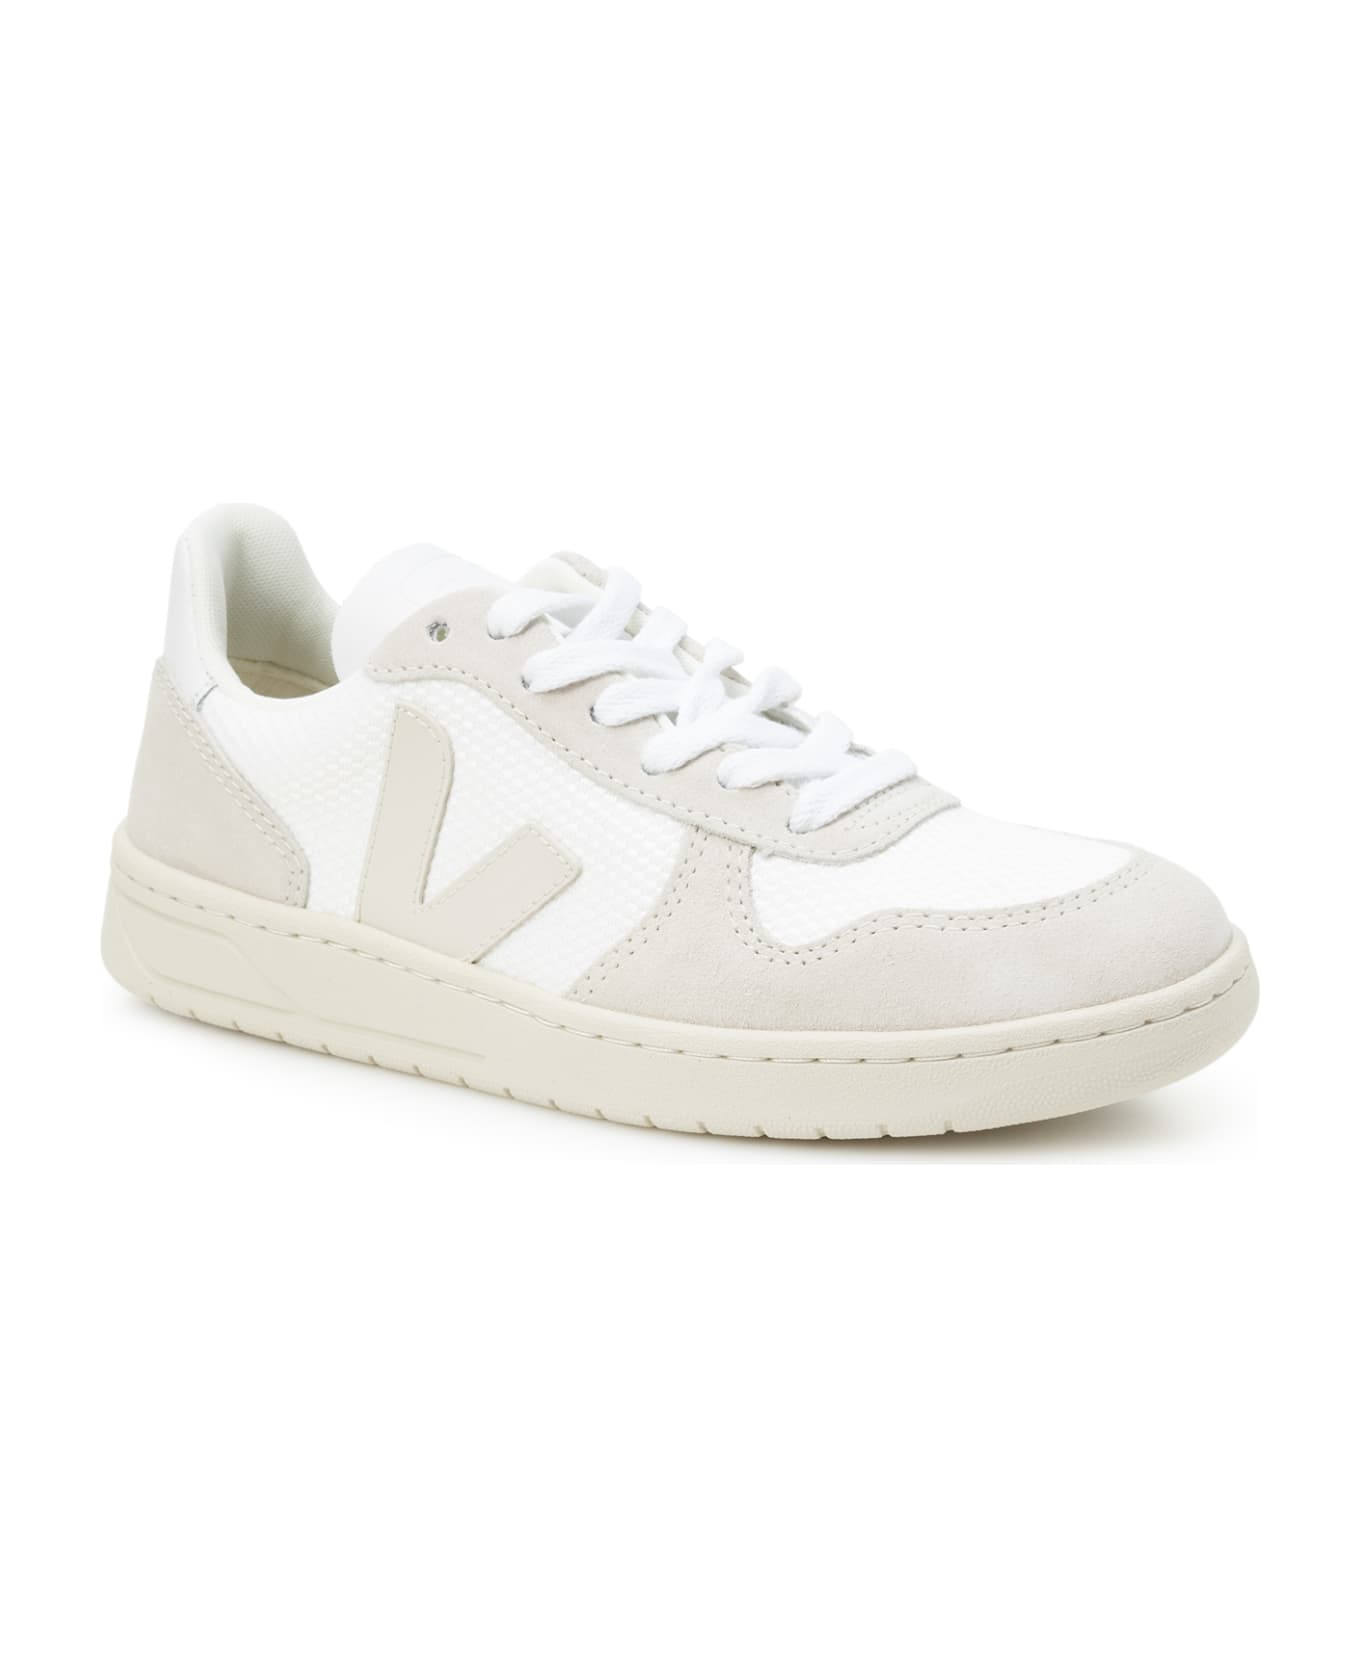 Veja Sneakers - White/natural pierre スニーカー